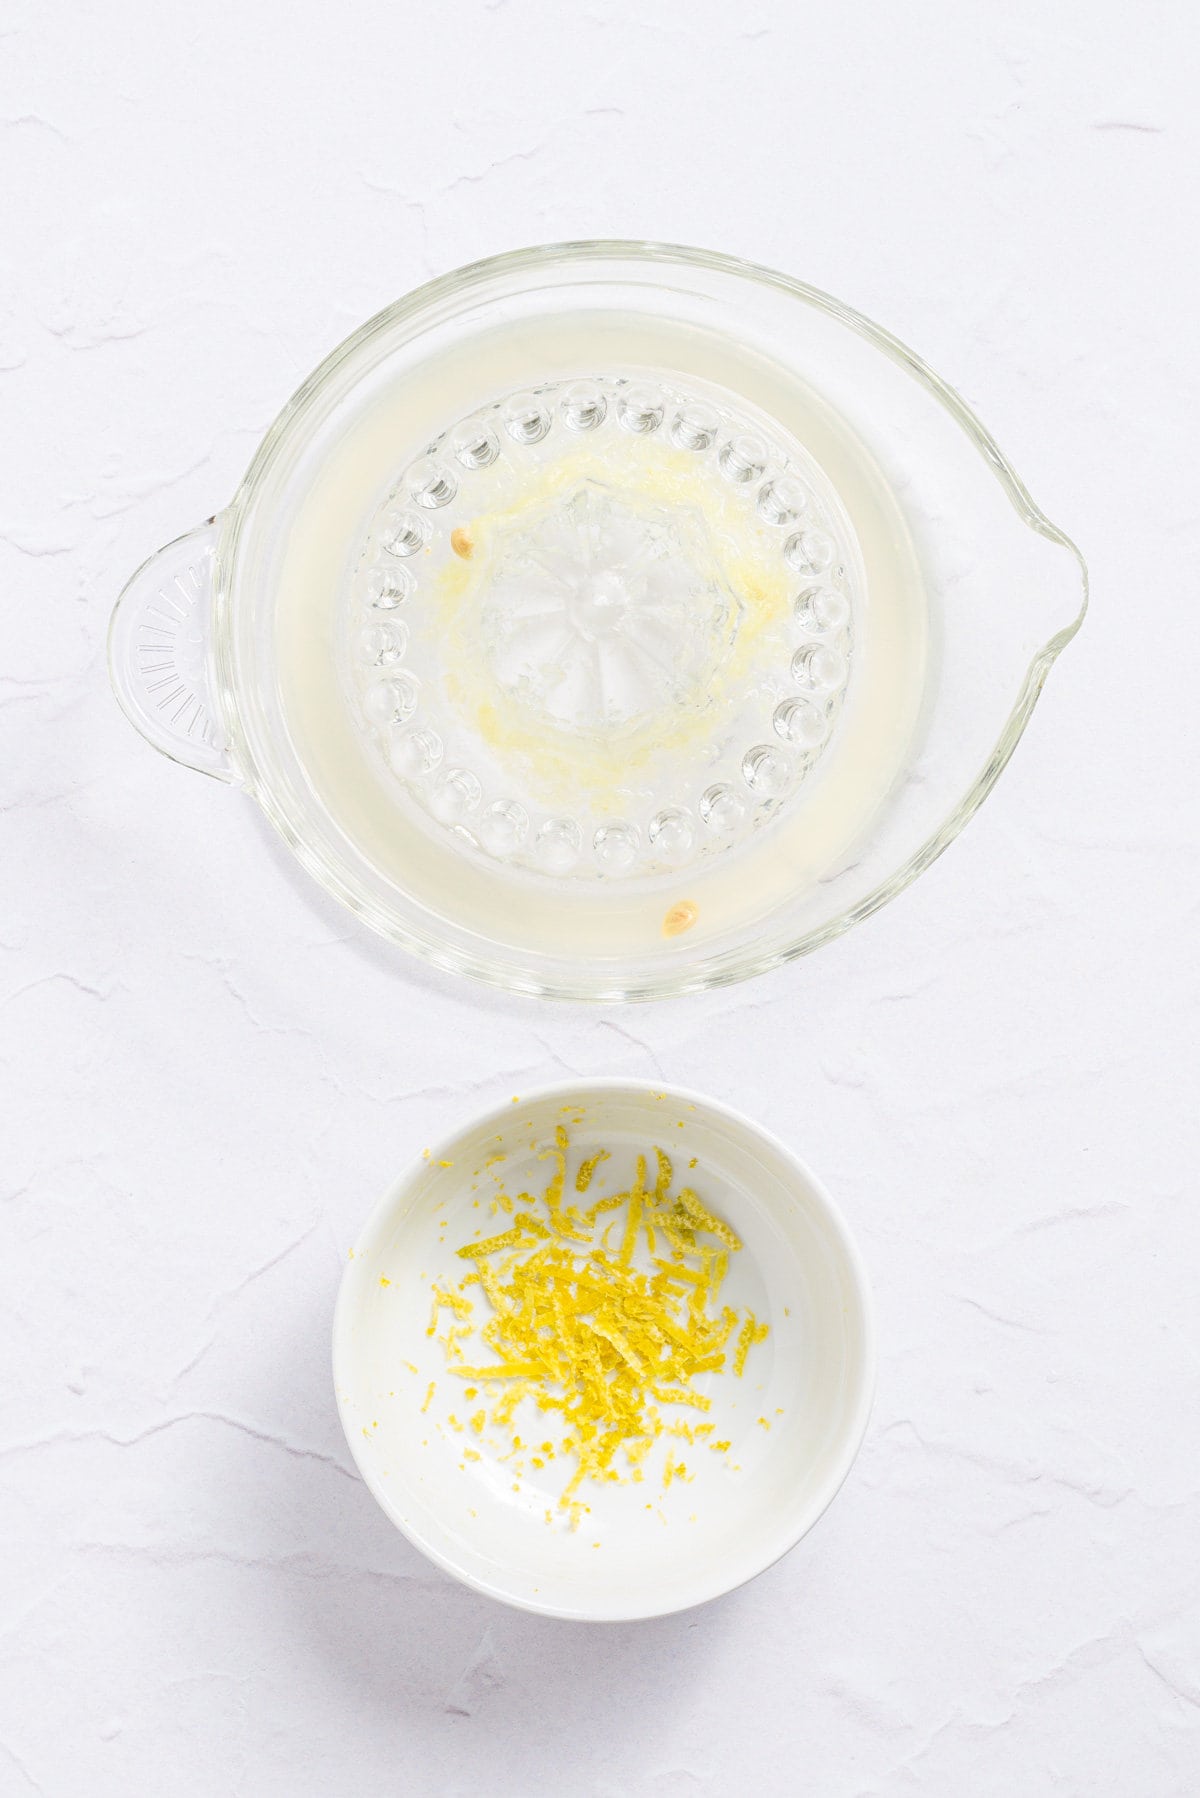 An overhead image of lemon juice and lemon zest in separate containers